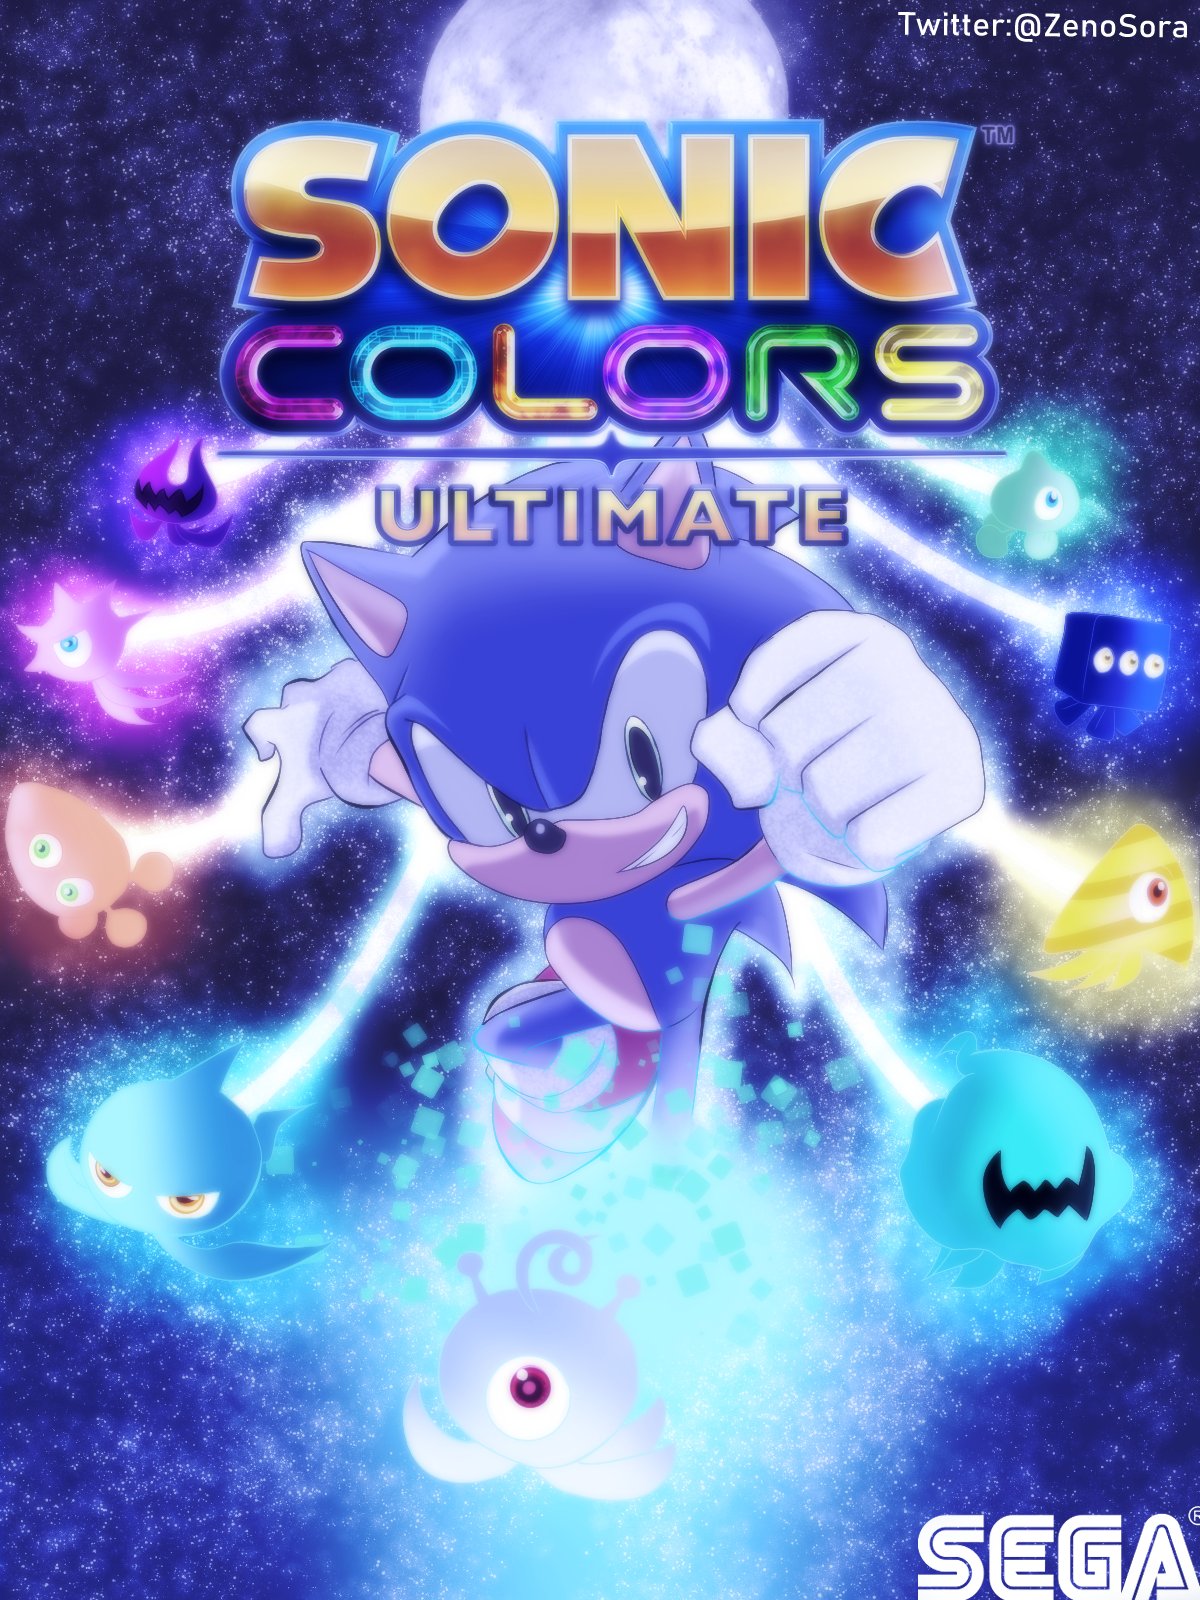 2021 Sonic Colors Ultimate Framed Print Ad/poster PS4 Xbox One -  Israel